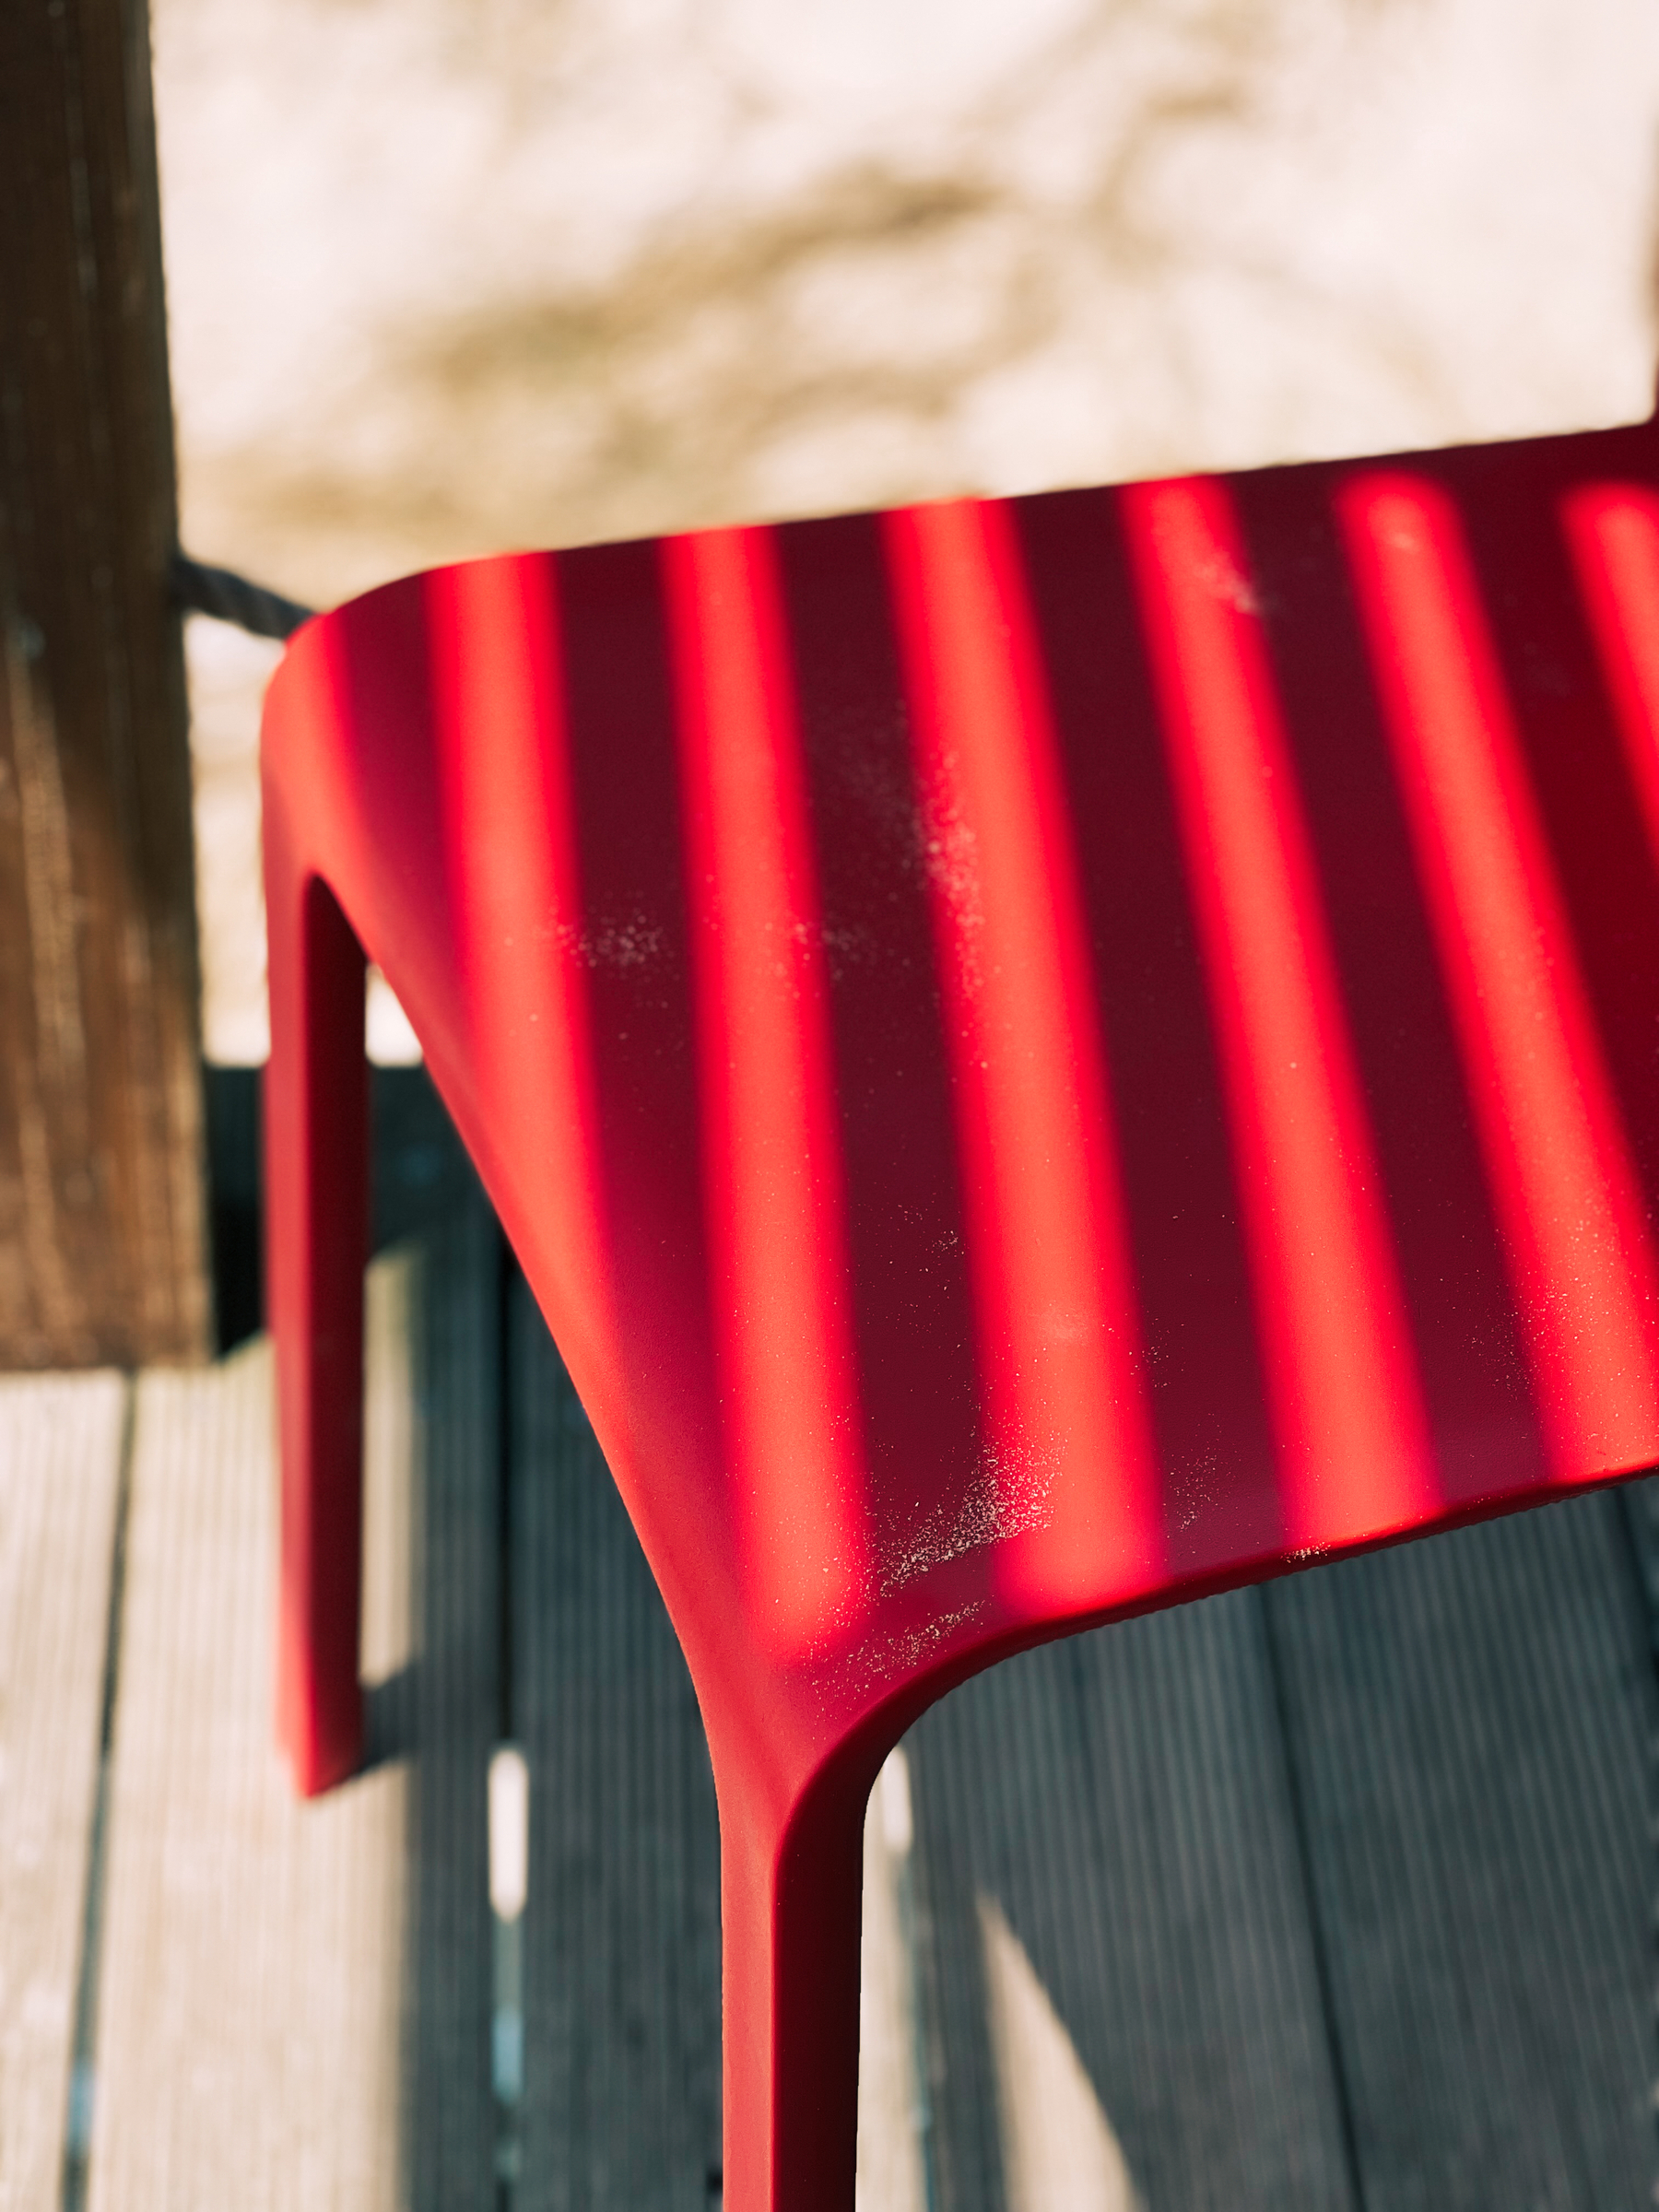 Shadows on a red chair. 